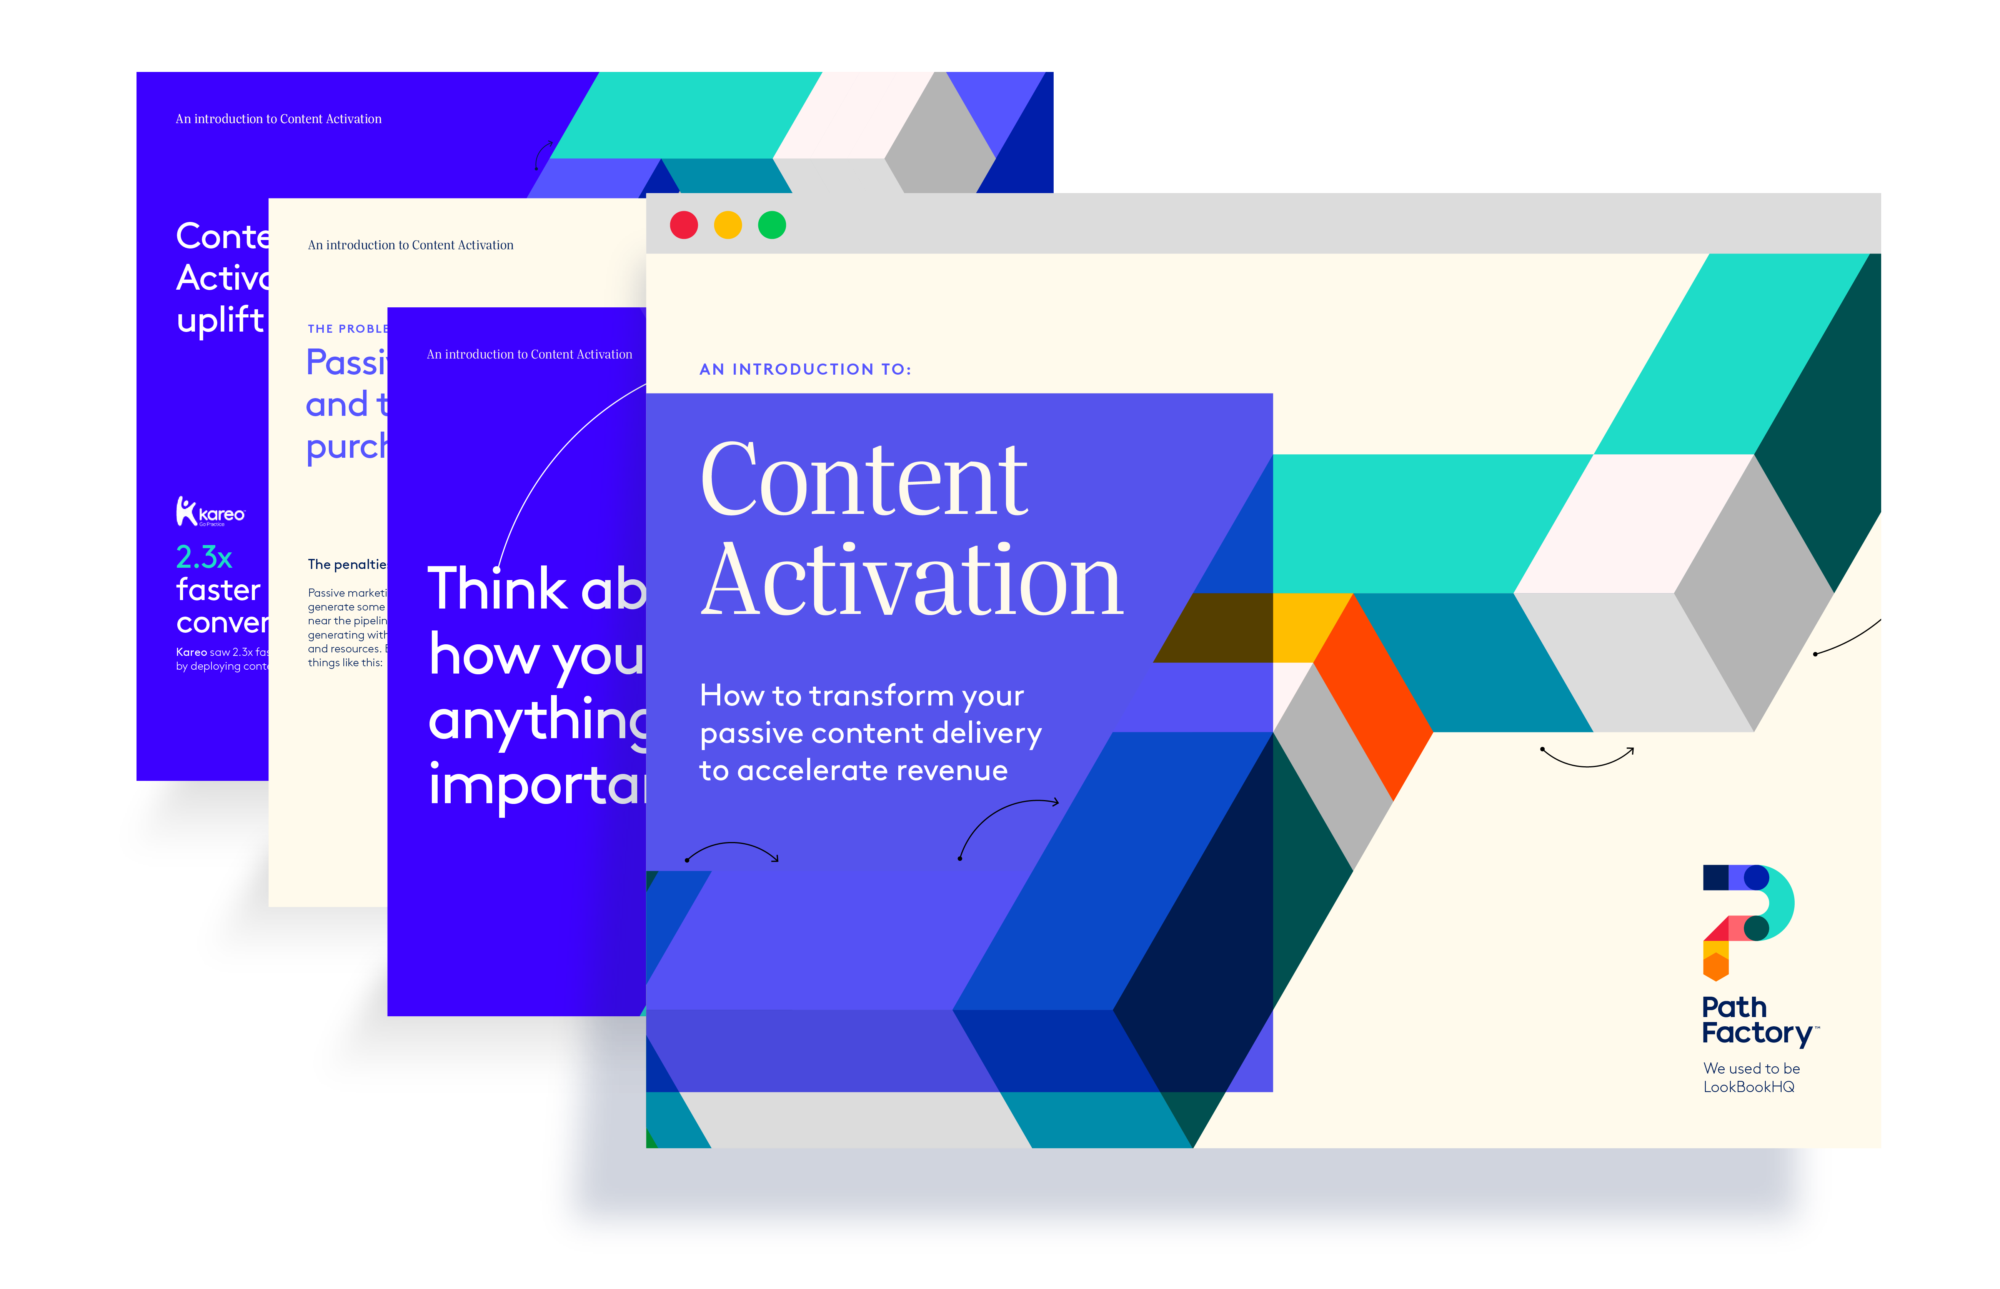 Content Activation, How to Transform your passive content delivery to accelerate revenue